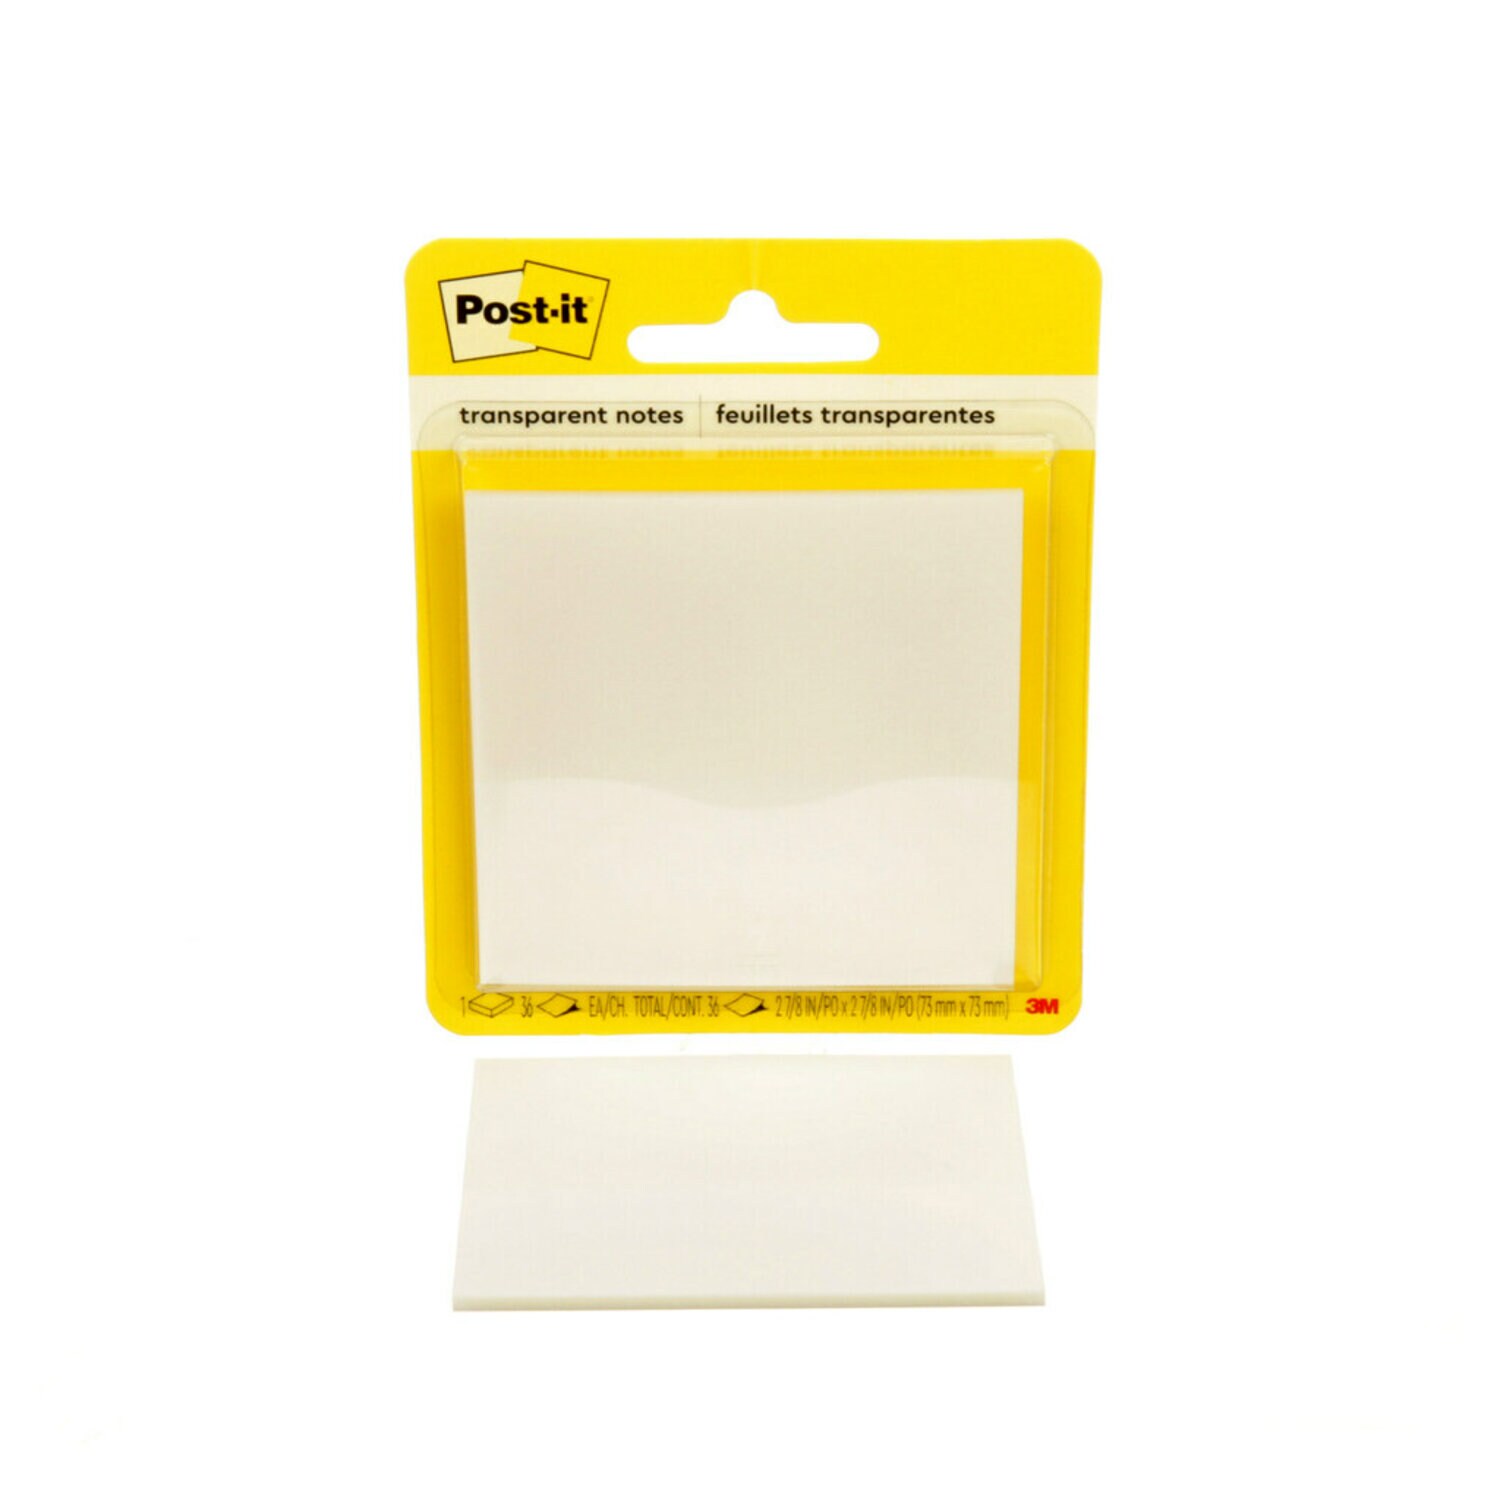 7100241321 - Post-it Printed Notes 600-TRSPT, 2-7/8 in x 2-7/8 in (73 mm x 73 mm)